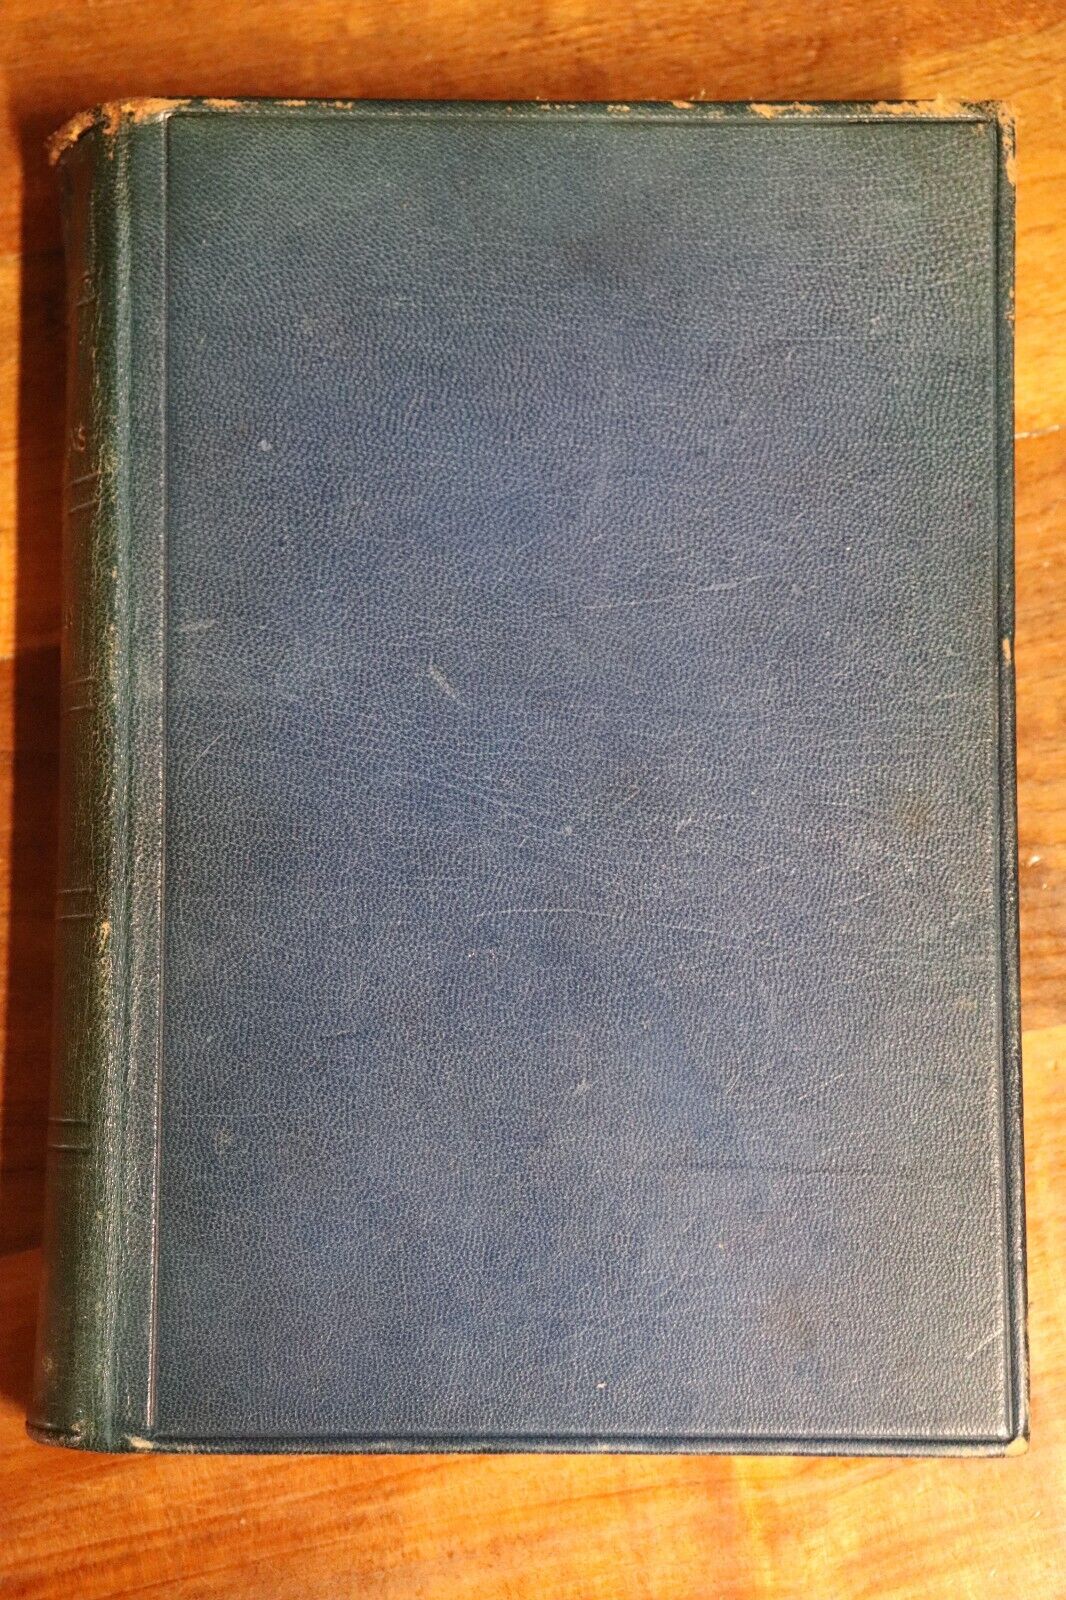 The Good Companions by JB Priestley - 1929 - Antique Literature Book